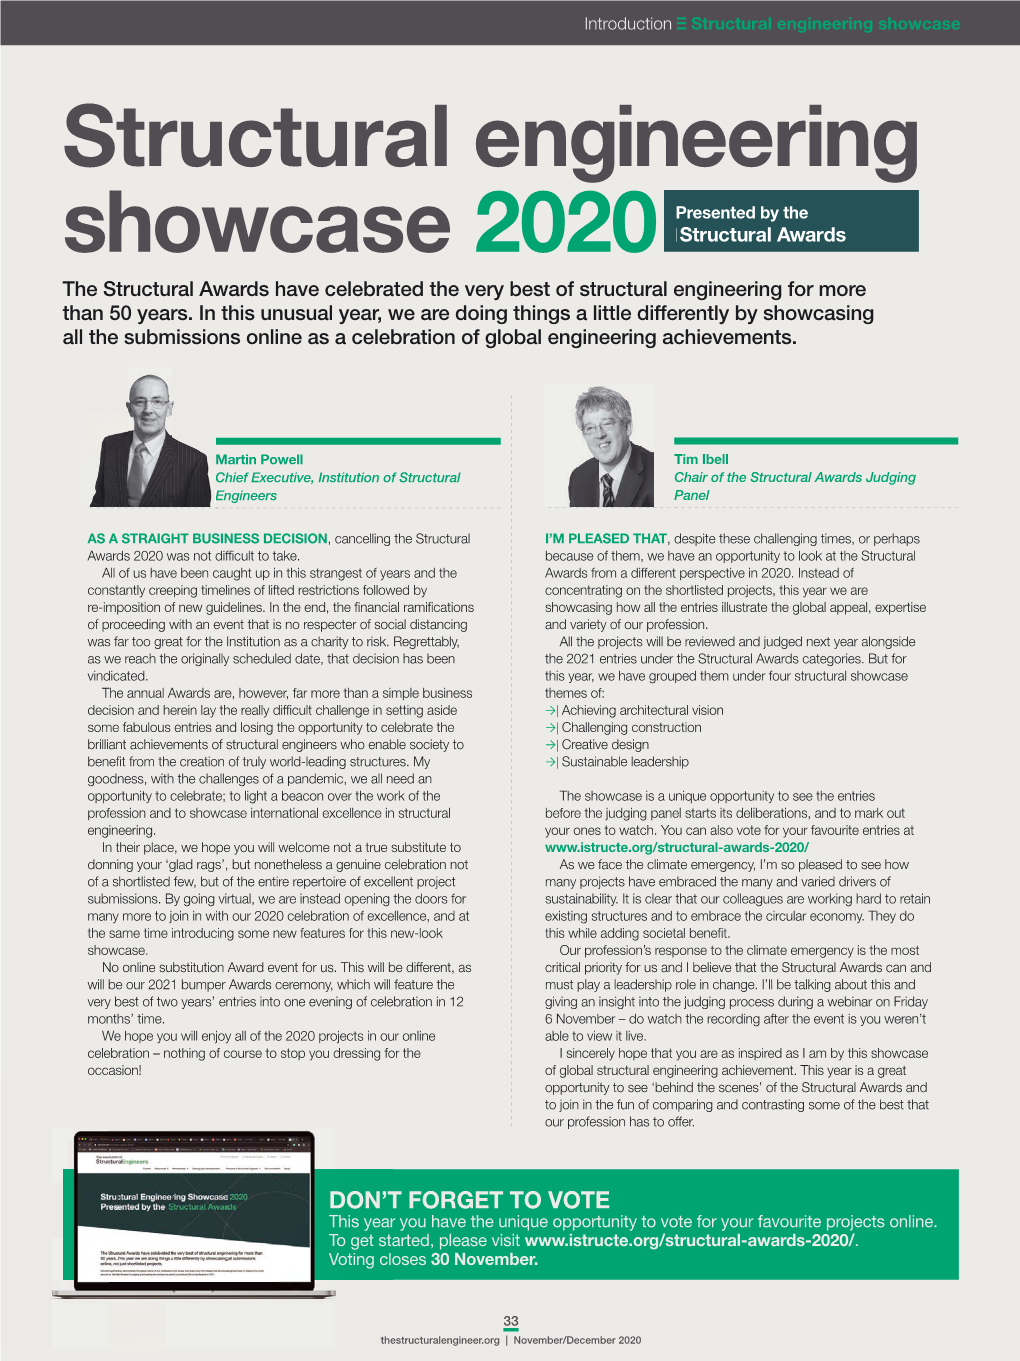 Structural Engineering Showcase 2020 Presented by the the Structural Awards Have Celebrated the Very Best of Structural Engineering for More Than 50 Years